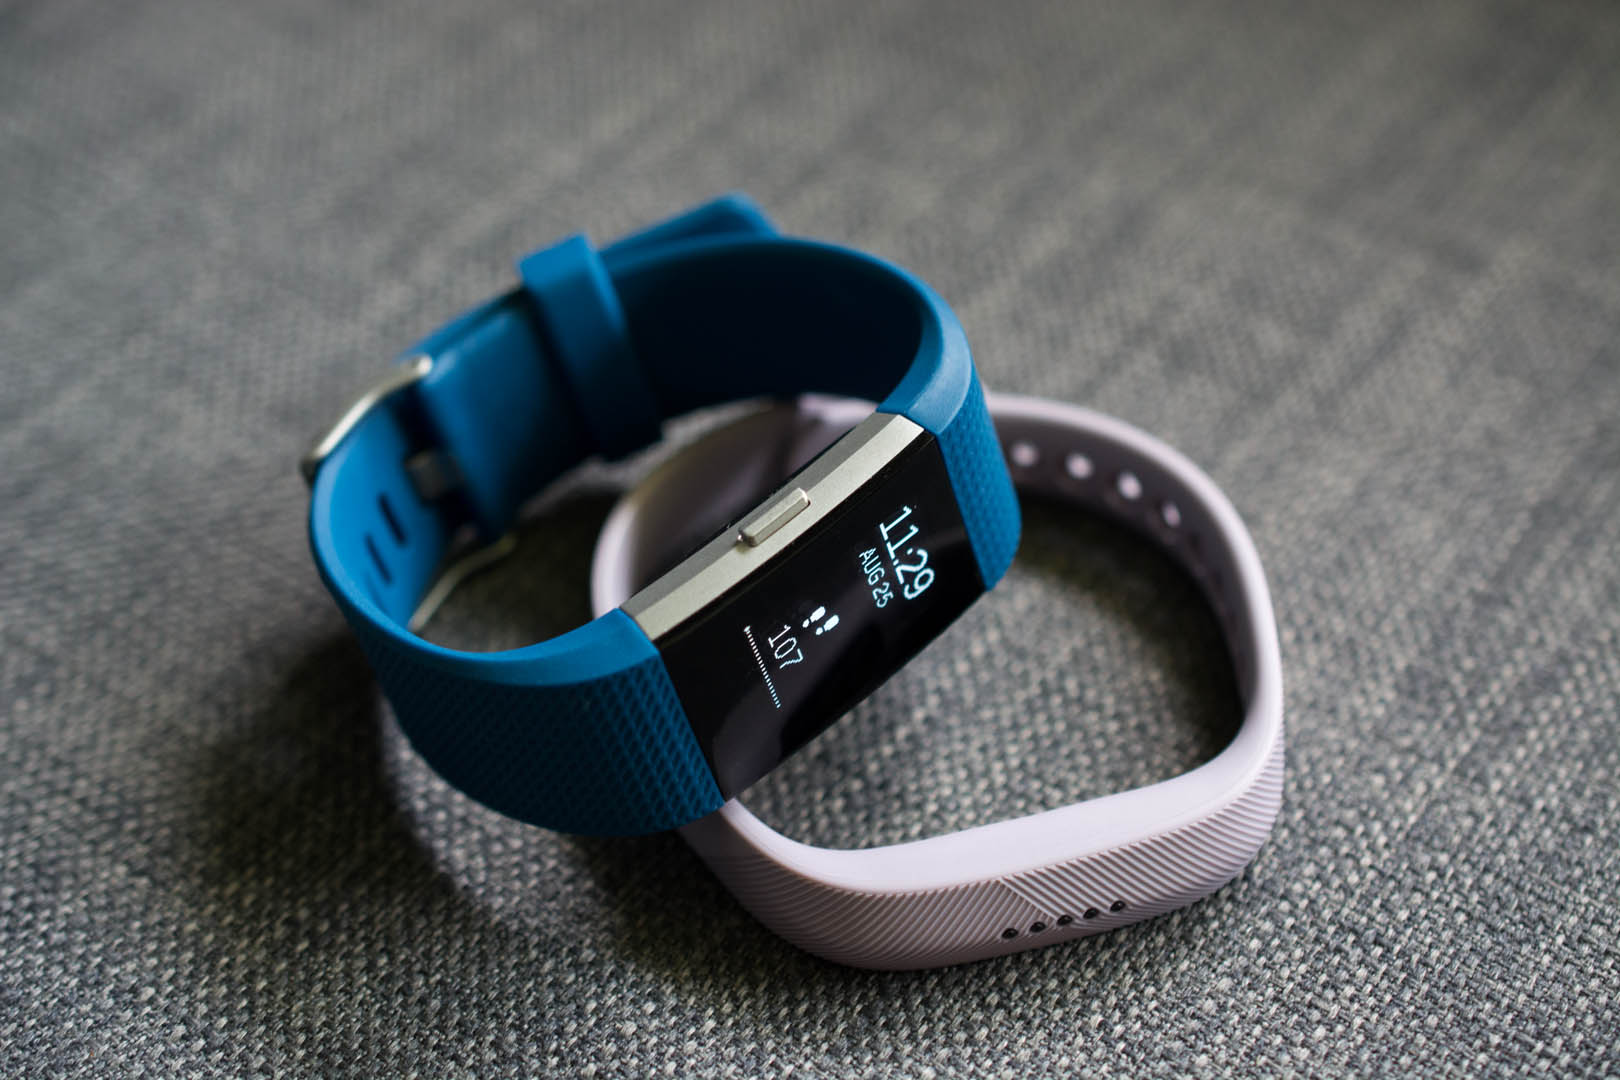 fitbit style trackers